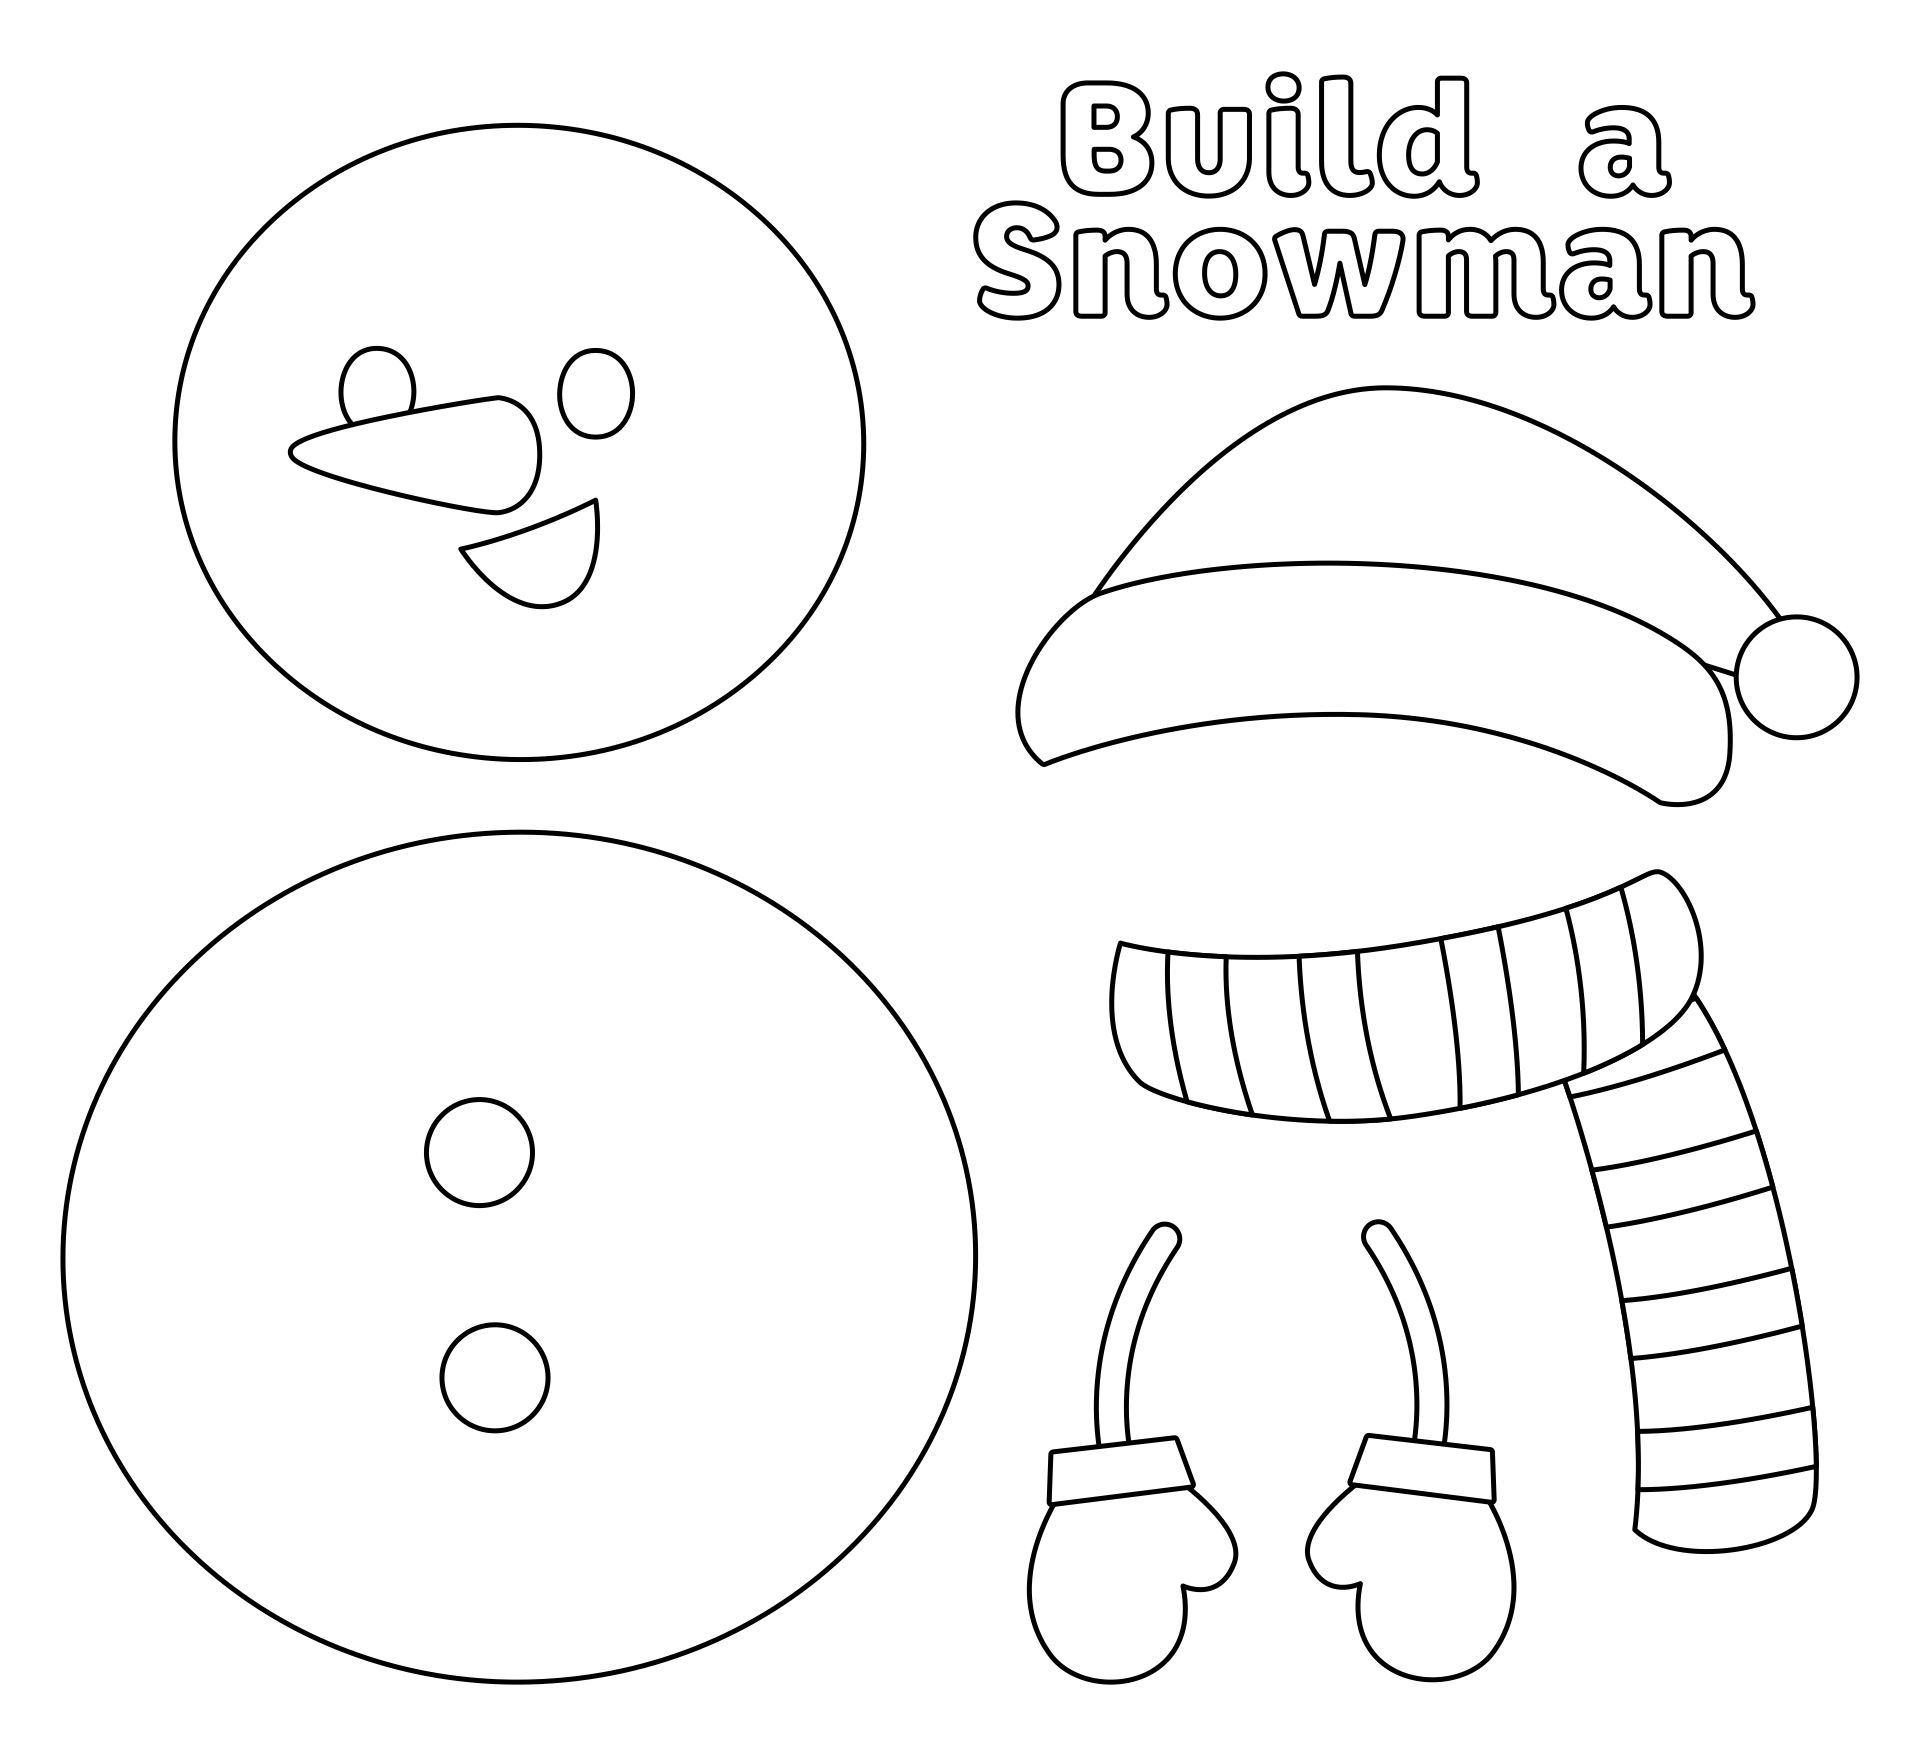 10 Best Printable Snowman Cut Out Pattern PDF for Free at Printablee